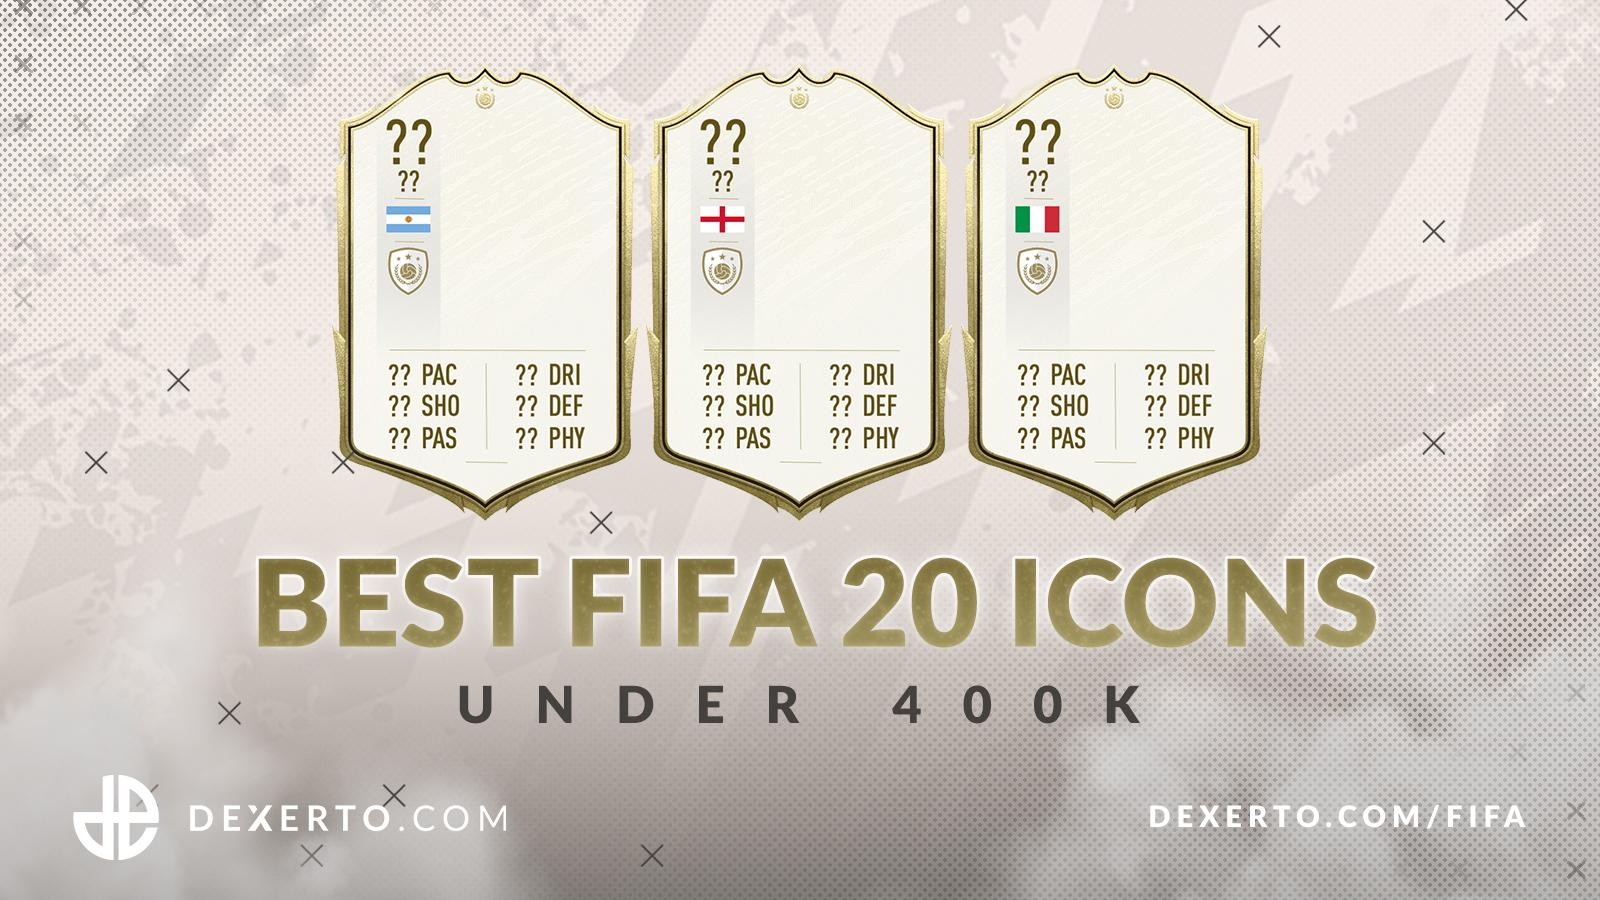 Best ICONs Under FUT Coins on PS4 & Xbox - Dexerto